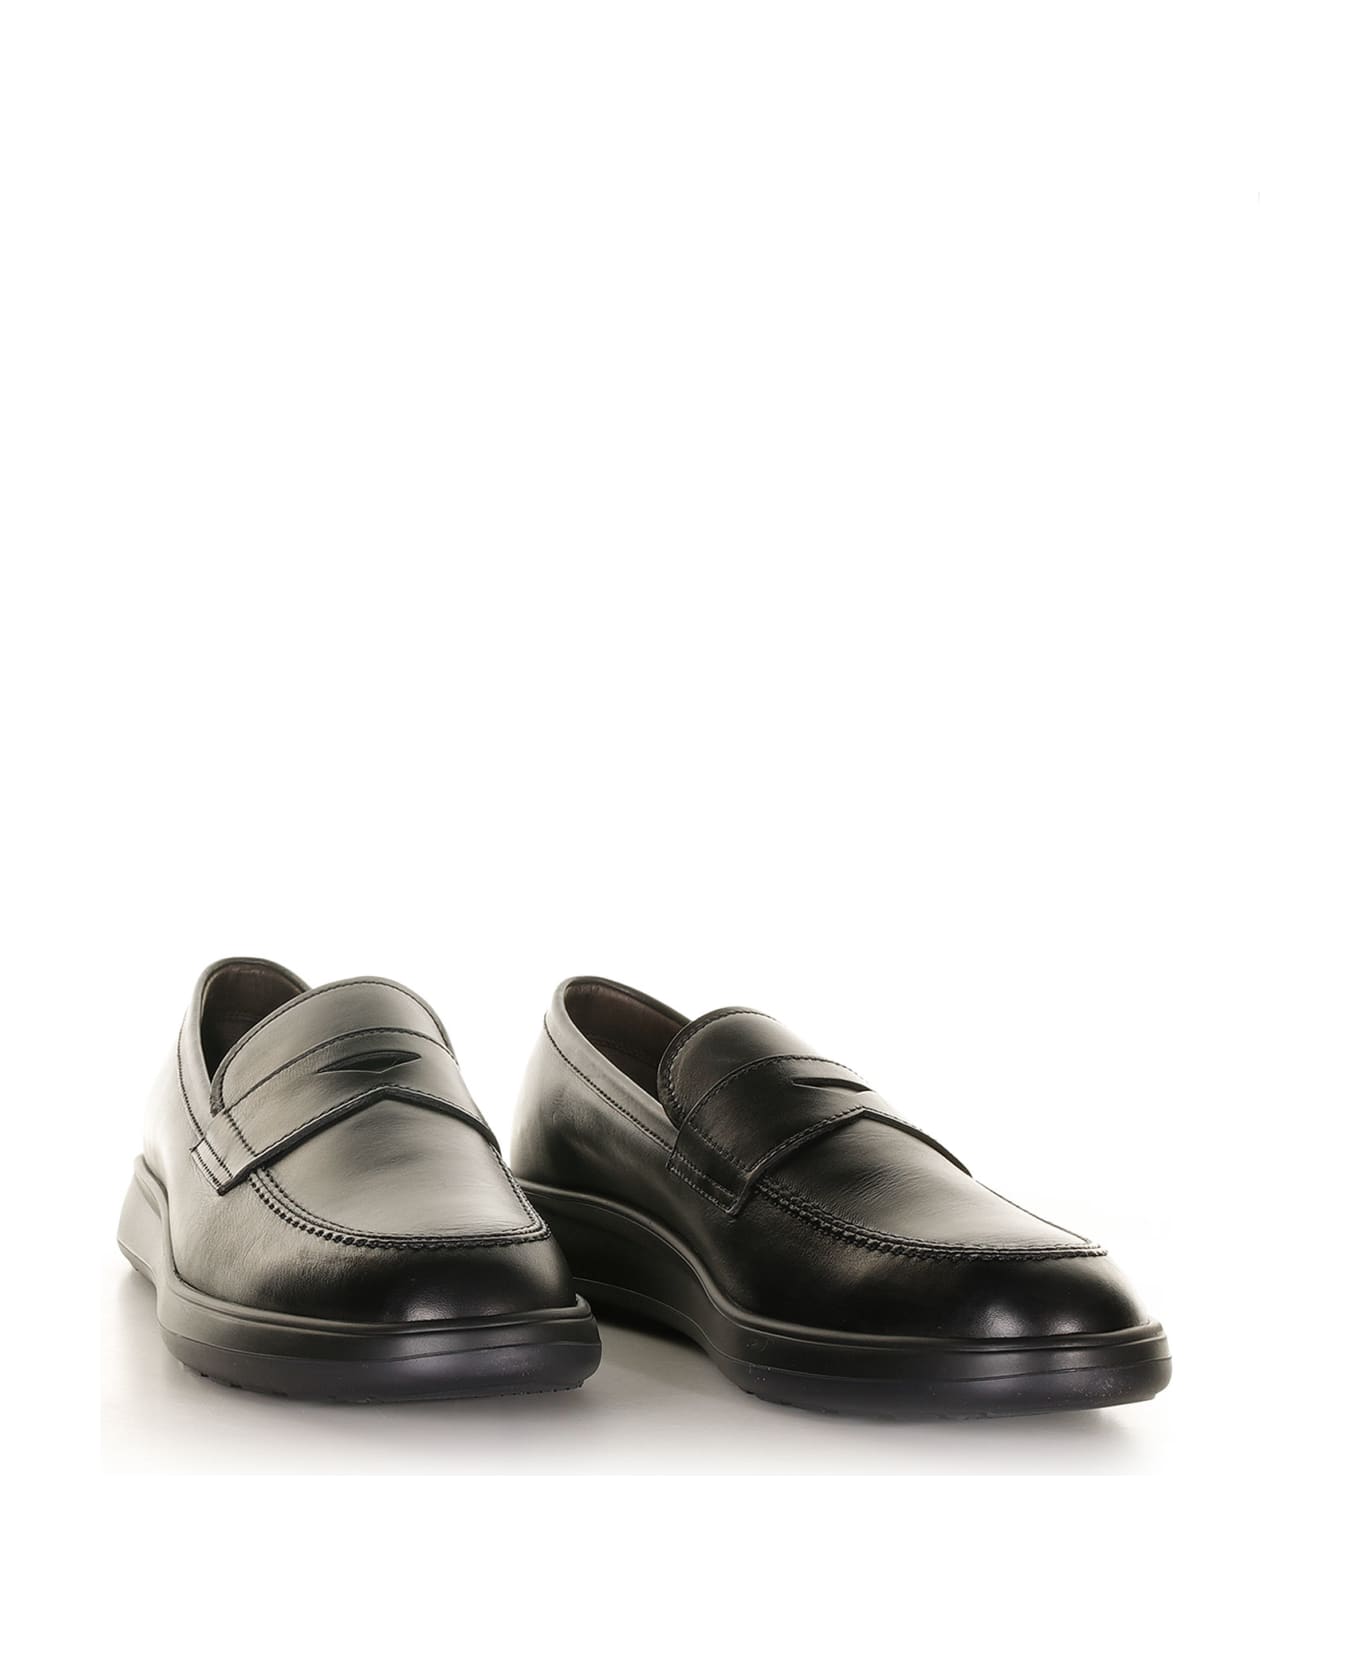 Fratelli Rossetti One Black Leather Loafers - NERO ローファー＆デッキシューズ